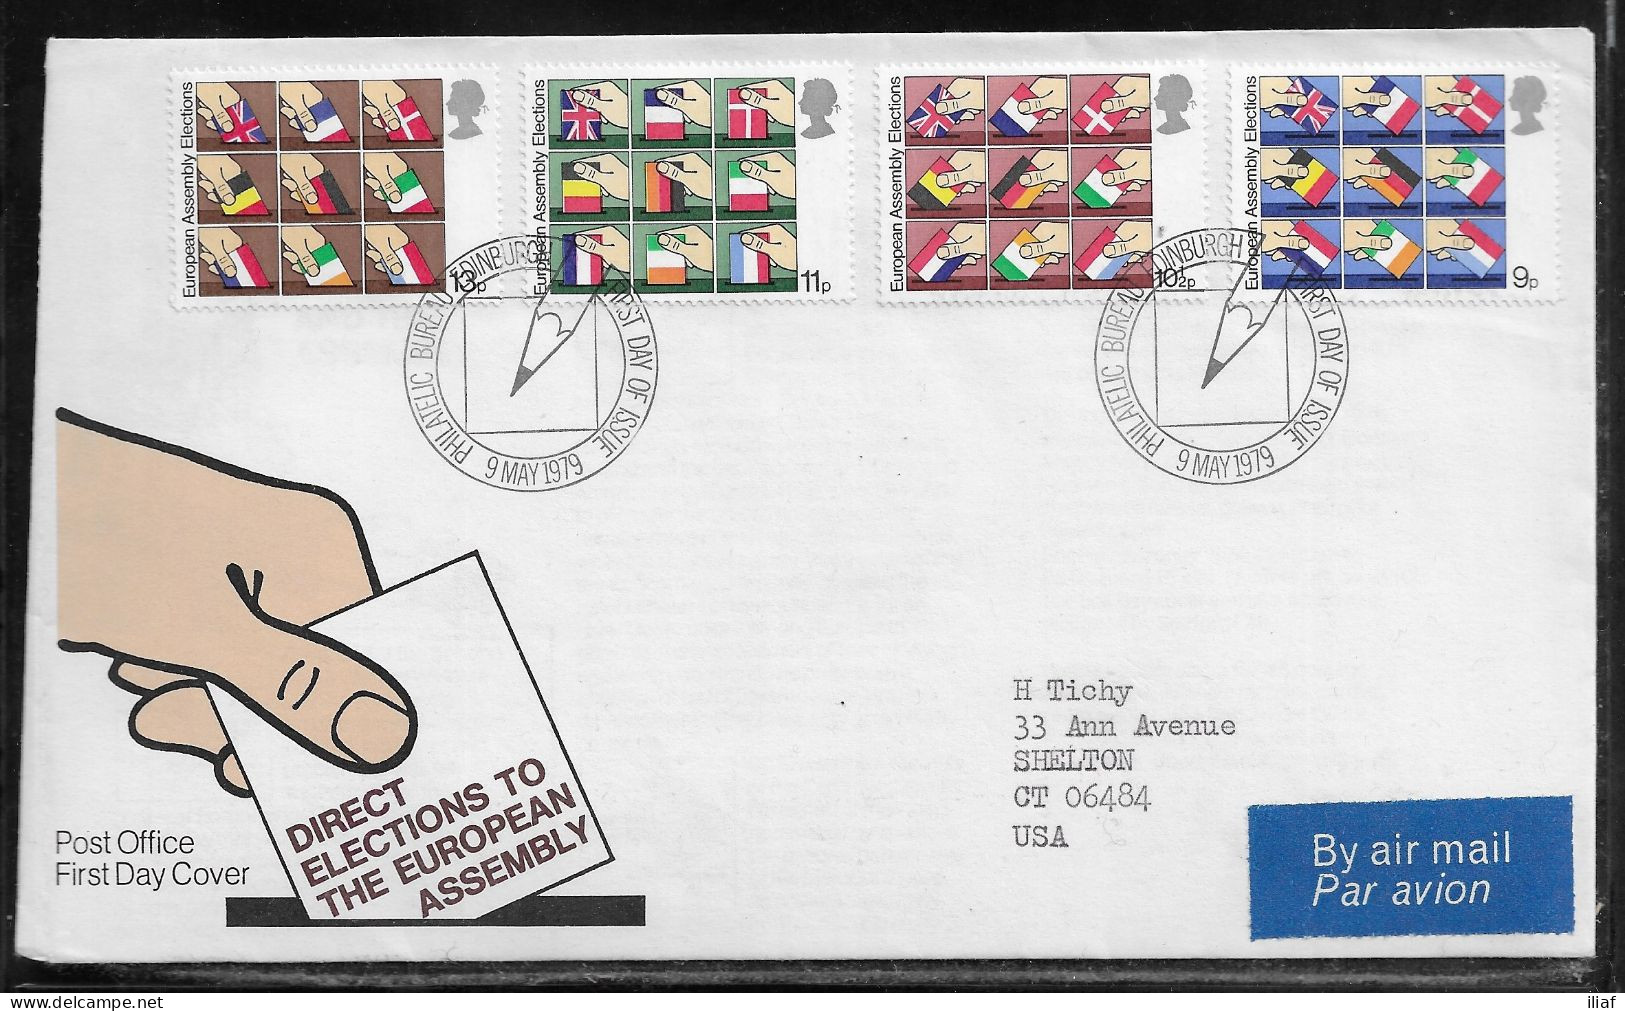 United Kingdom Of Great Britain.  FDC Sc. 859-862.  Hands Placing National Flags In Ballot Boxes  FDC Cancellation - 1971-1980 Dezimalausgaben